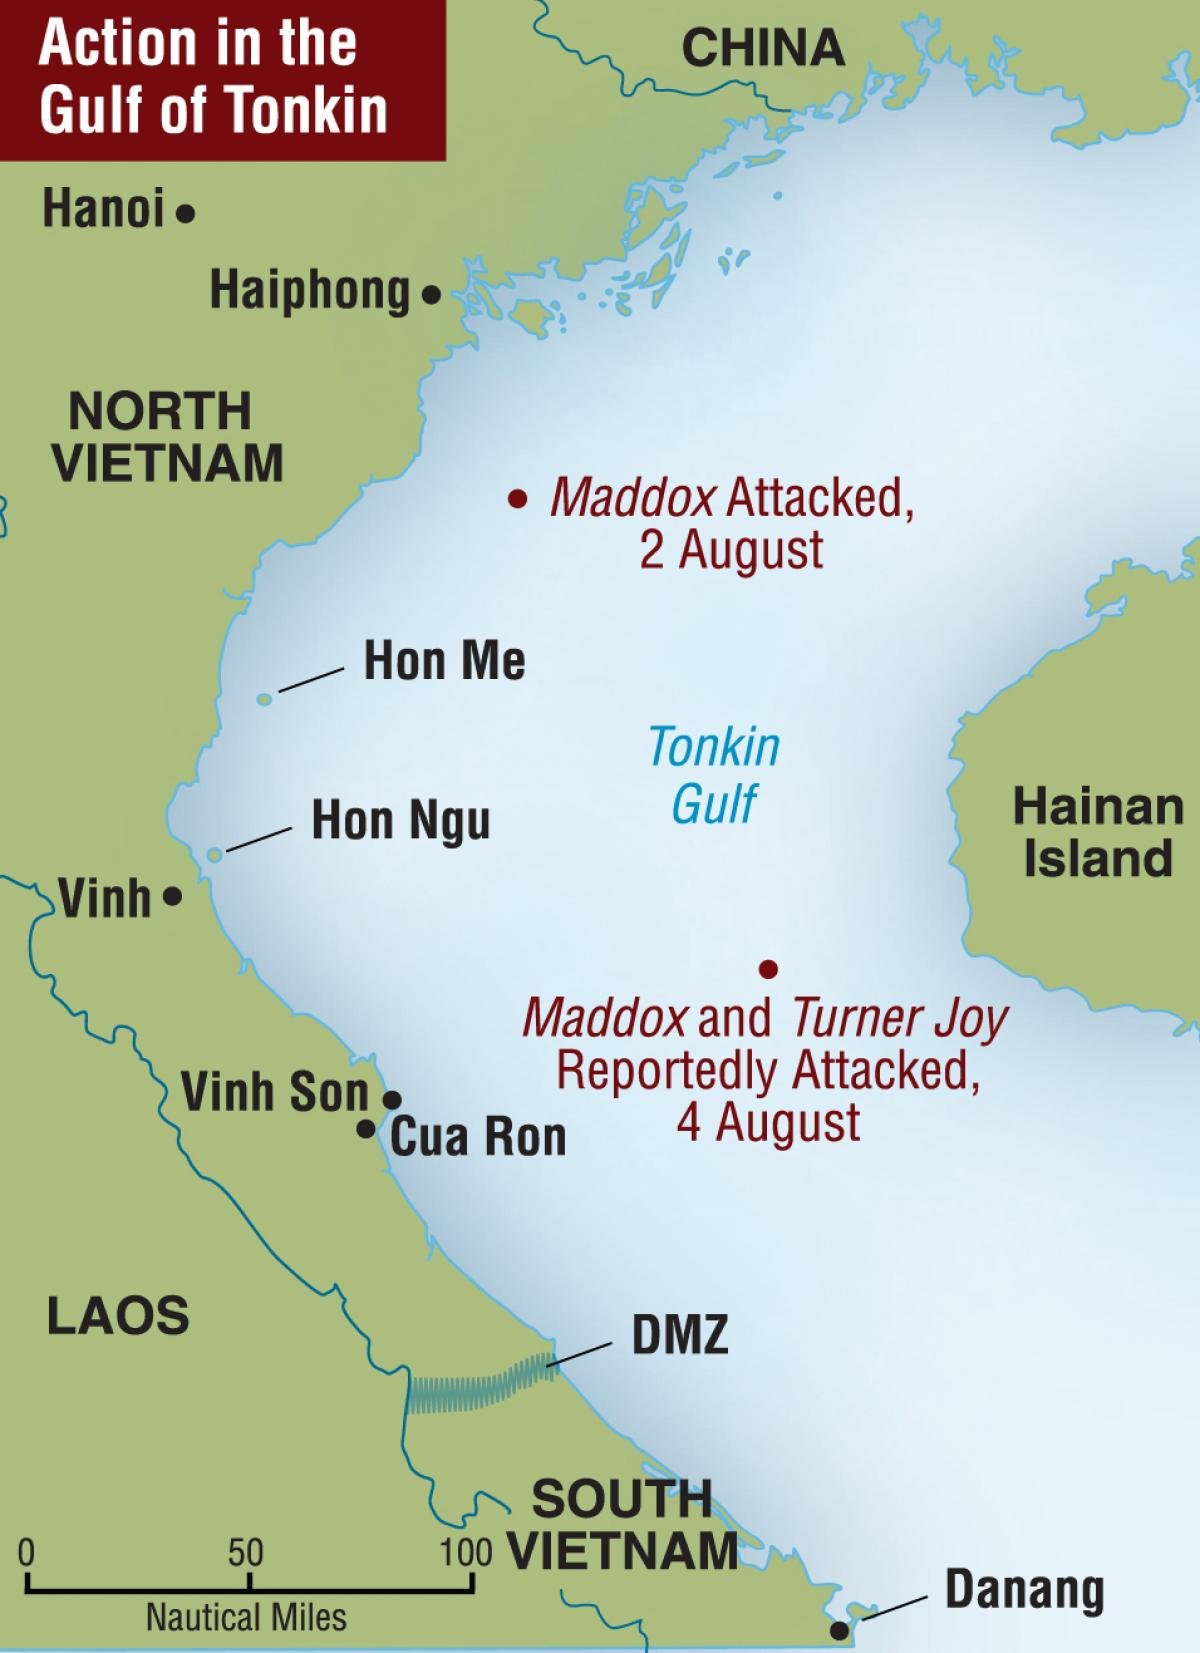 Map showing action in the gulf of Tonkin, August 1964